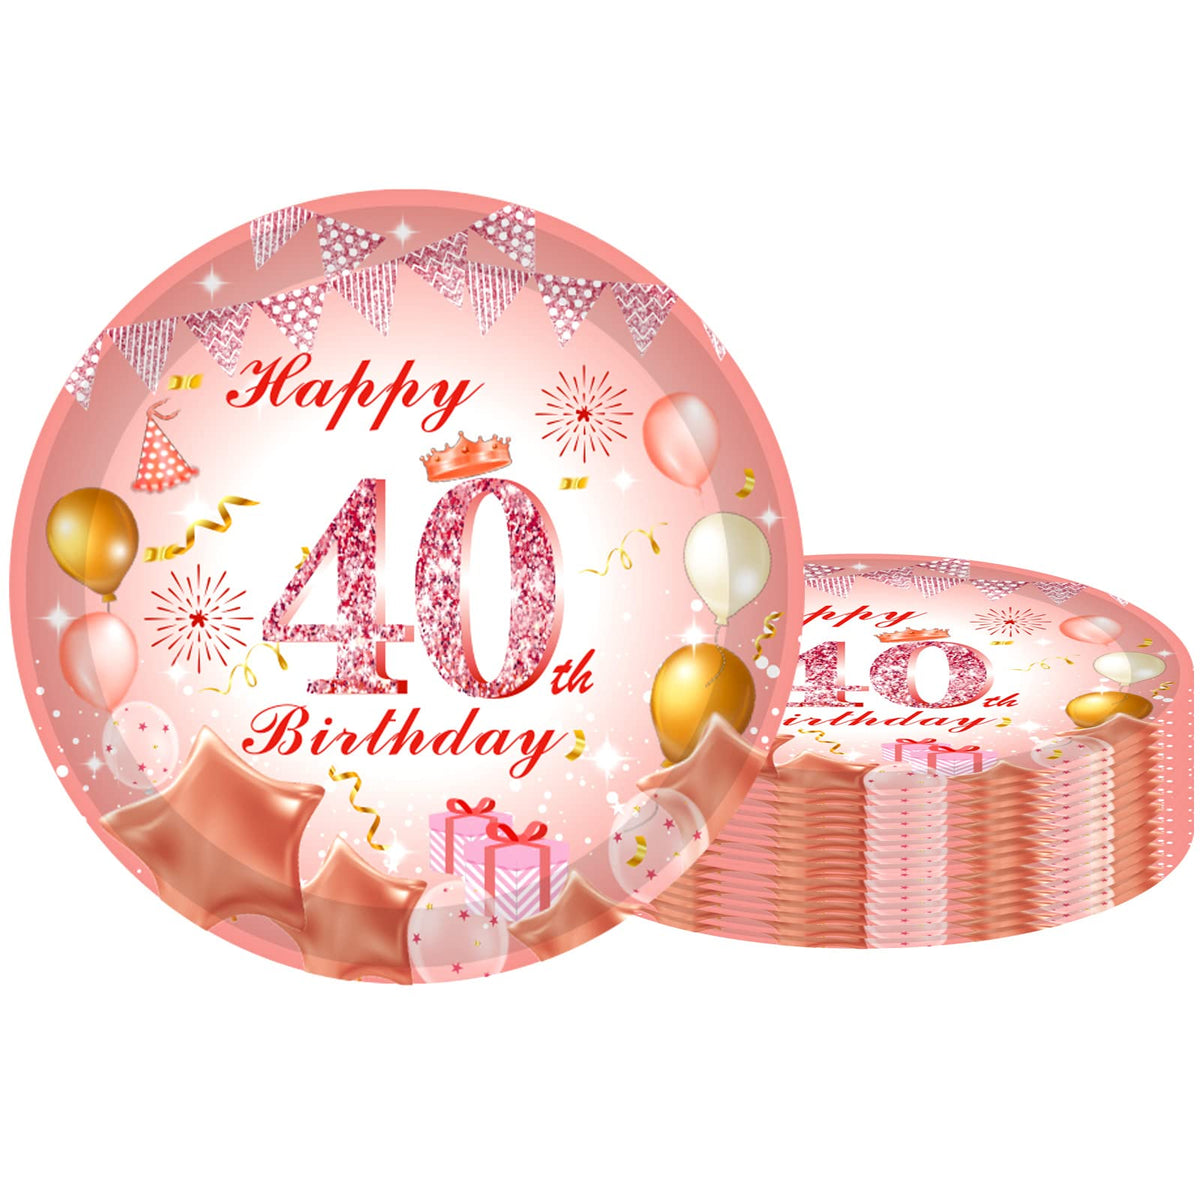 40th Party Plates 7 inch Rose Gold,40th Birthday Paper Plates Rose Gold 16Pcs,40th Pink Rose Gold Birthday Disposable Paper Tableware Set for Her Birthday Gifts,40th Women Birthday Party Decorations